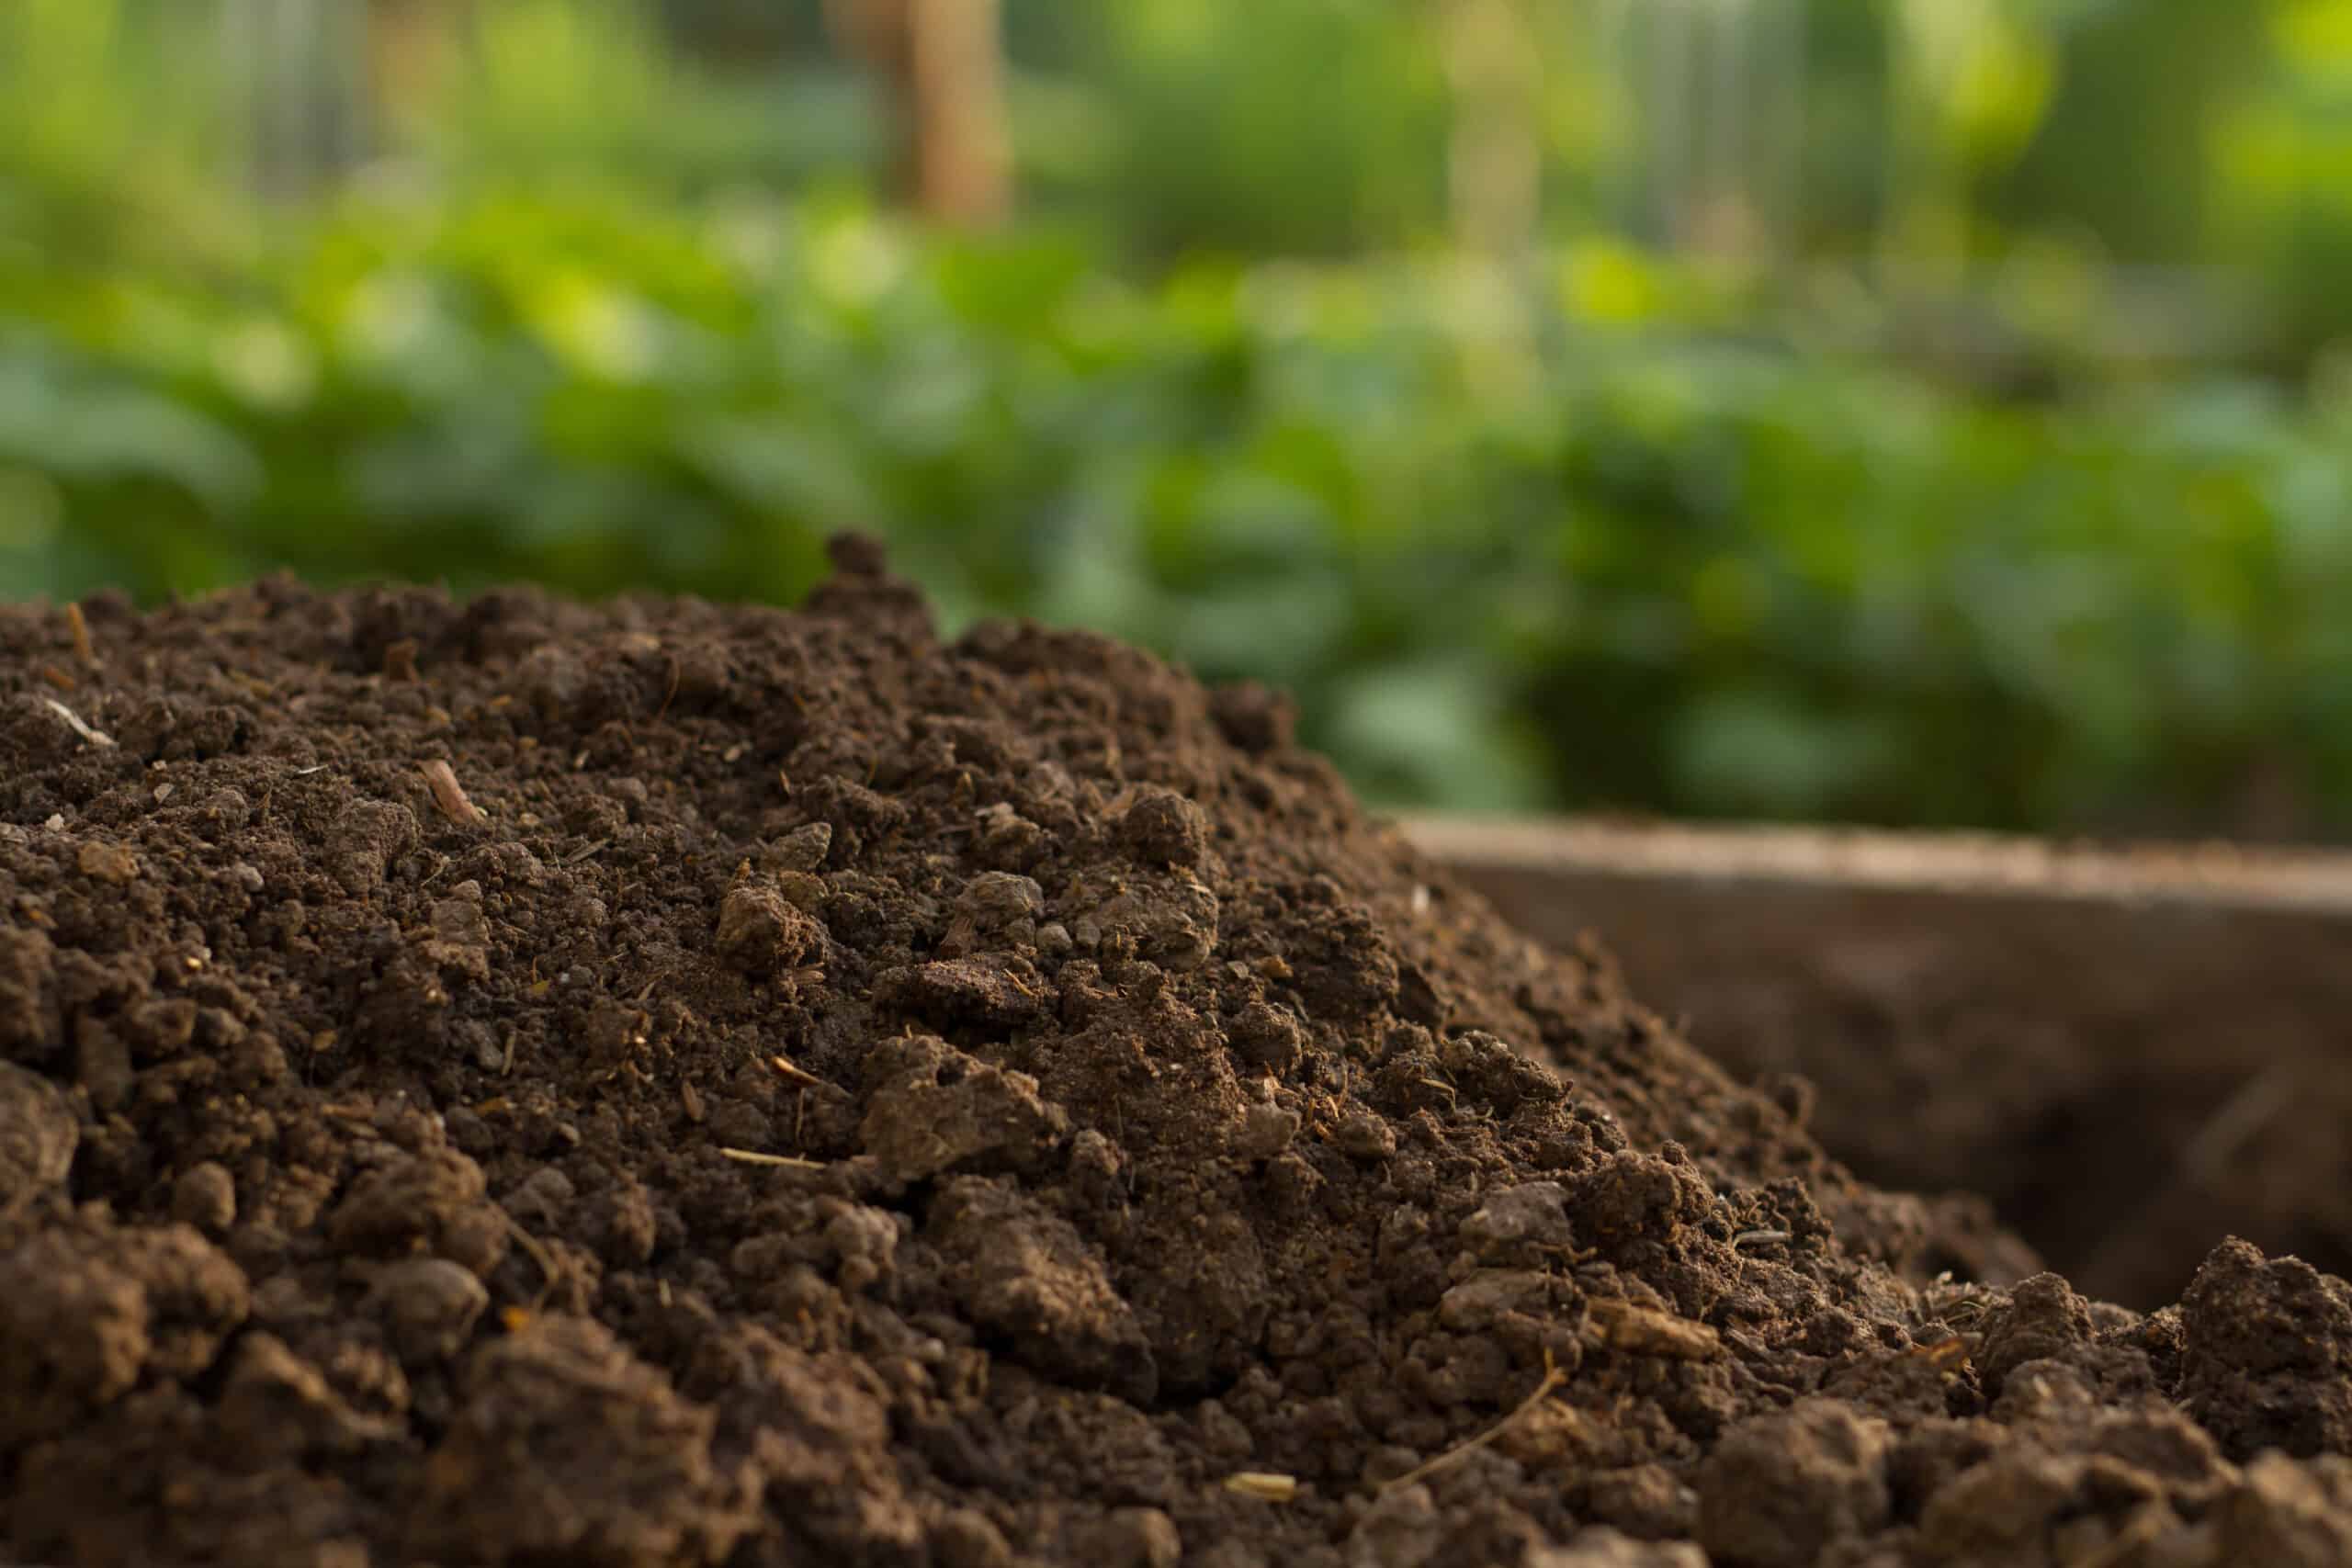 Farming practices that support soil health